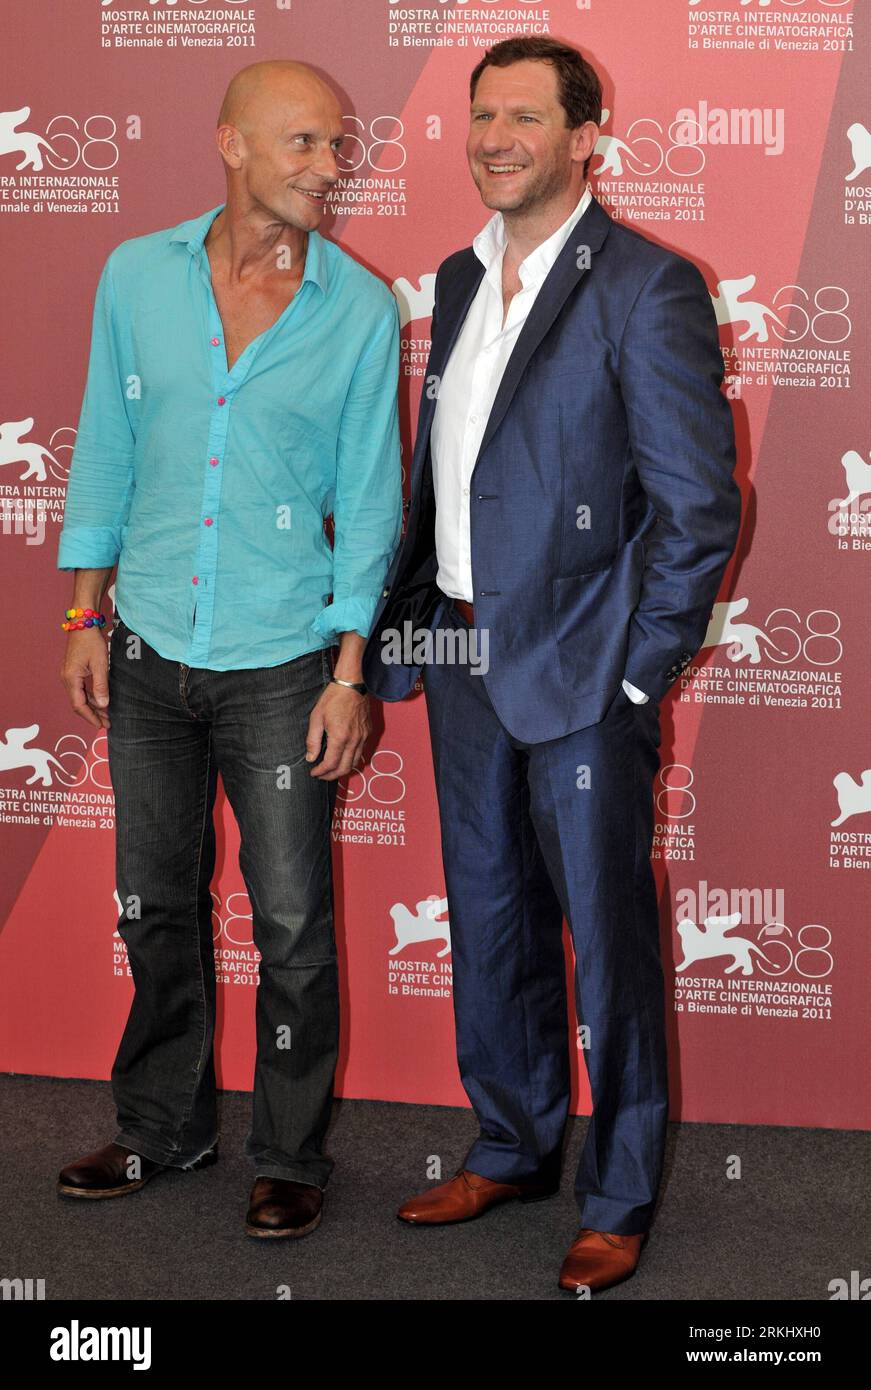 Bildnummer: 55927020  Datum: 08.09.2011  Copyright: imago/Xinhua (110908) -- VENICE, Sept. 8, 2011 (Xinhua) -- Actors Johannes Zeiler (R) and Anton Adasinsky, pose during the photo-call for the film Faust at the 68th Venice International Film Festival in Venice, Italy, Sept. 8, 2011. (Xinhua/Wang Qingqin) (zcc) ITALY-VENICE-FILM FESTIVAL- FAUST PUBLICATIONxNOTxINxCHN People Entertainment Kultur Film 68 Internationale Filmfestspiele Venedig Photocall x0x xst premiumd 2011 hoch      55927020 Date 08 09 2011 Copyright Imago XINHUA  Venice Sept 8 2011 XINHUA Actors John Zeiler r and Anton Adasinsk Stock Photo